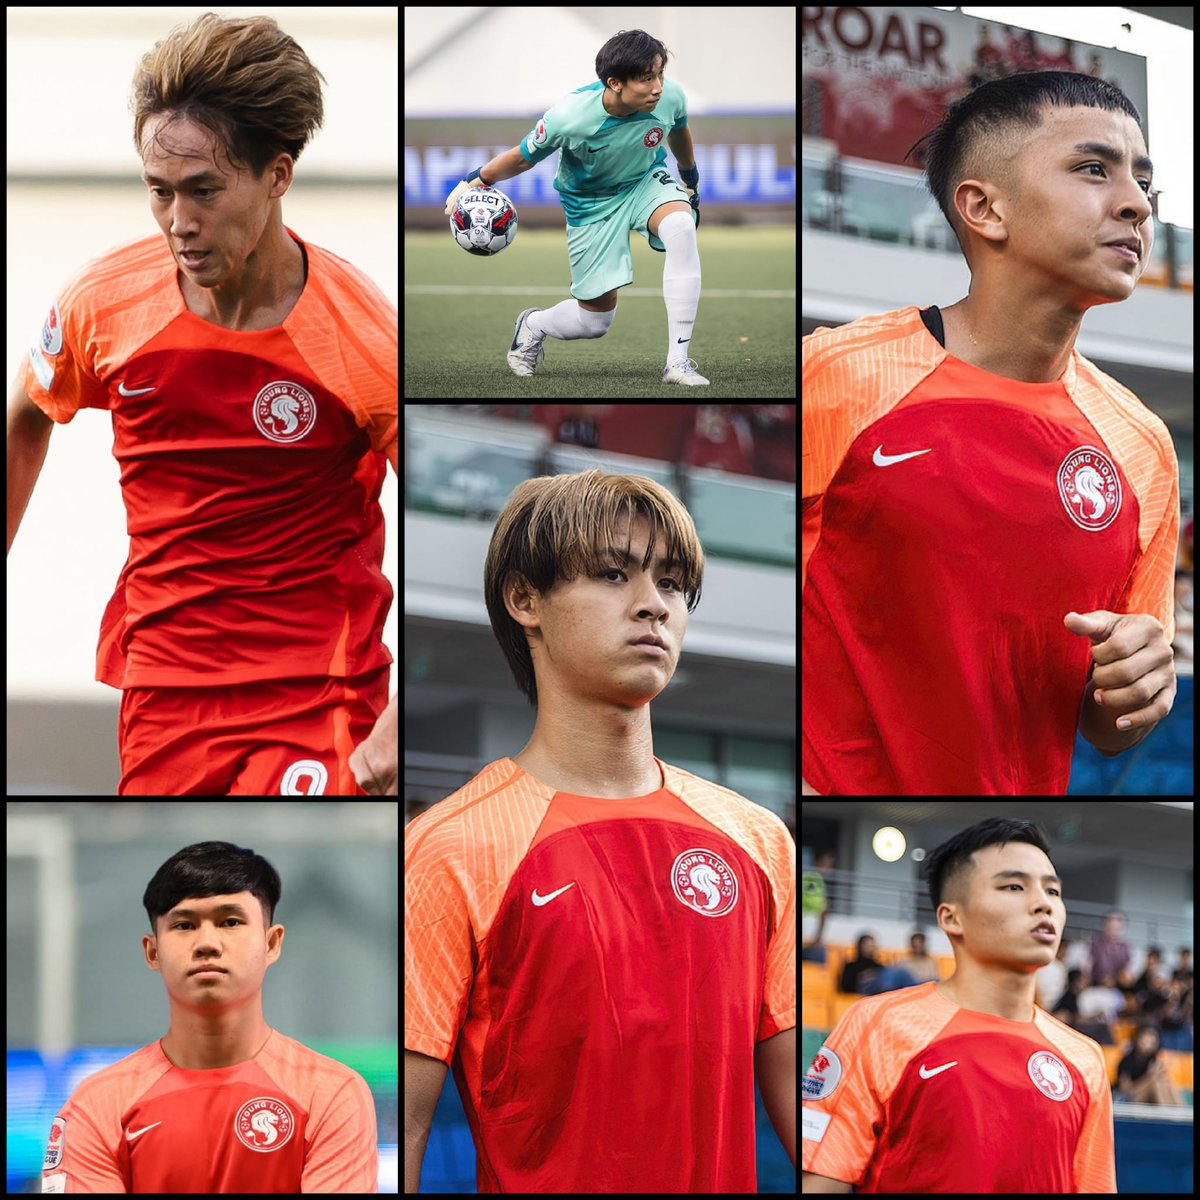 Enomoto, Ogawa, Jonan, Fathullah, Travis and Ethan made their SPL debut for the Young Lions in the match against DPMM. More to come guys! 🦁⚽ #coyl #younglions